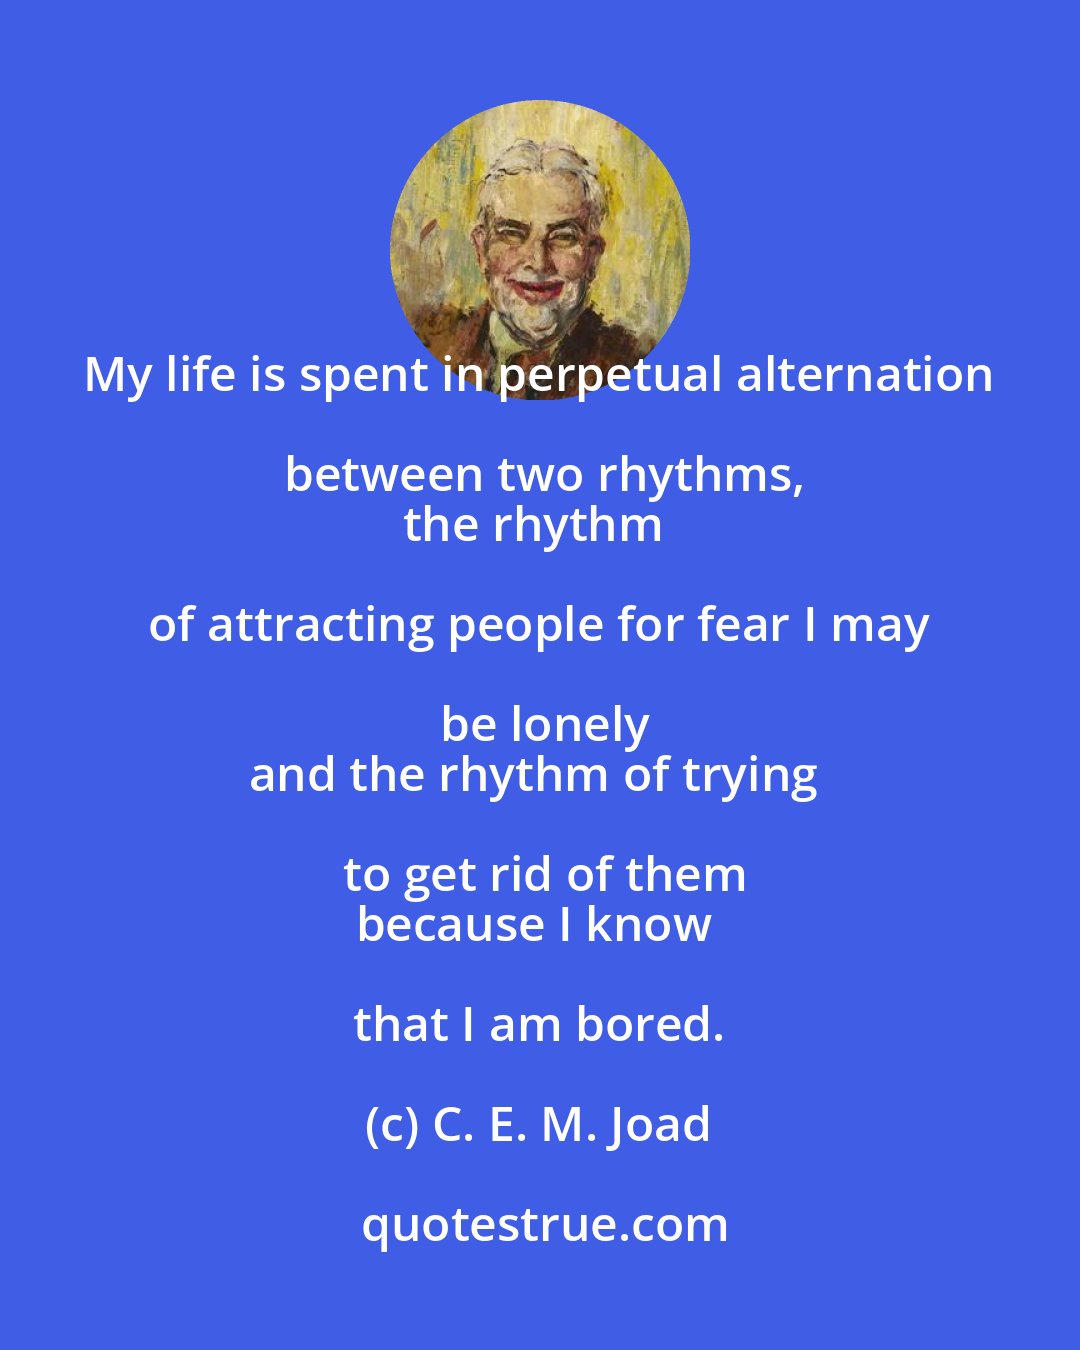 C. E. M. Joad: My life is spent in perpetual alternation between two rhythms,
the rhythm of attracting people for fear I may be lonely
and the rhythm of trying to get rid of them
because I know that I am bored.